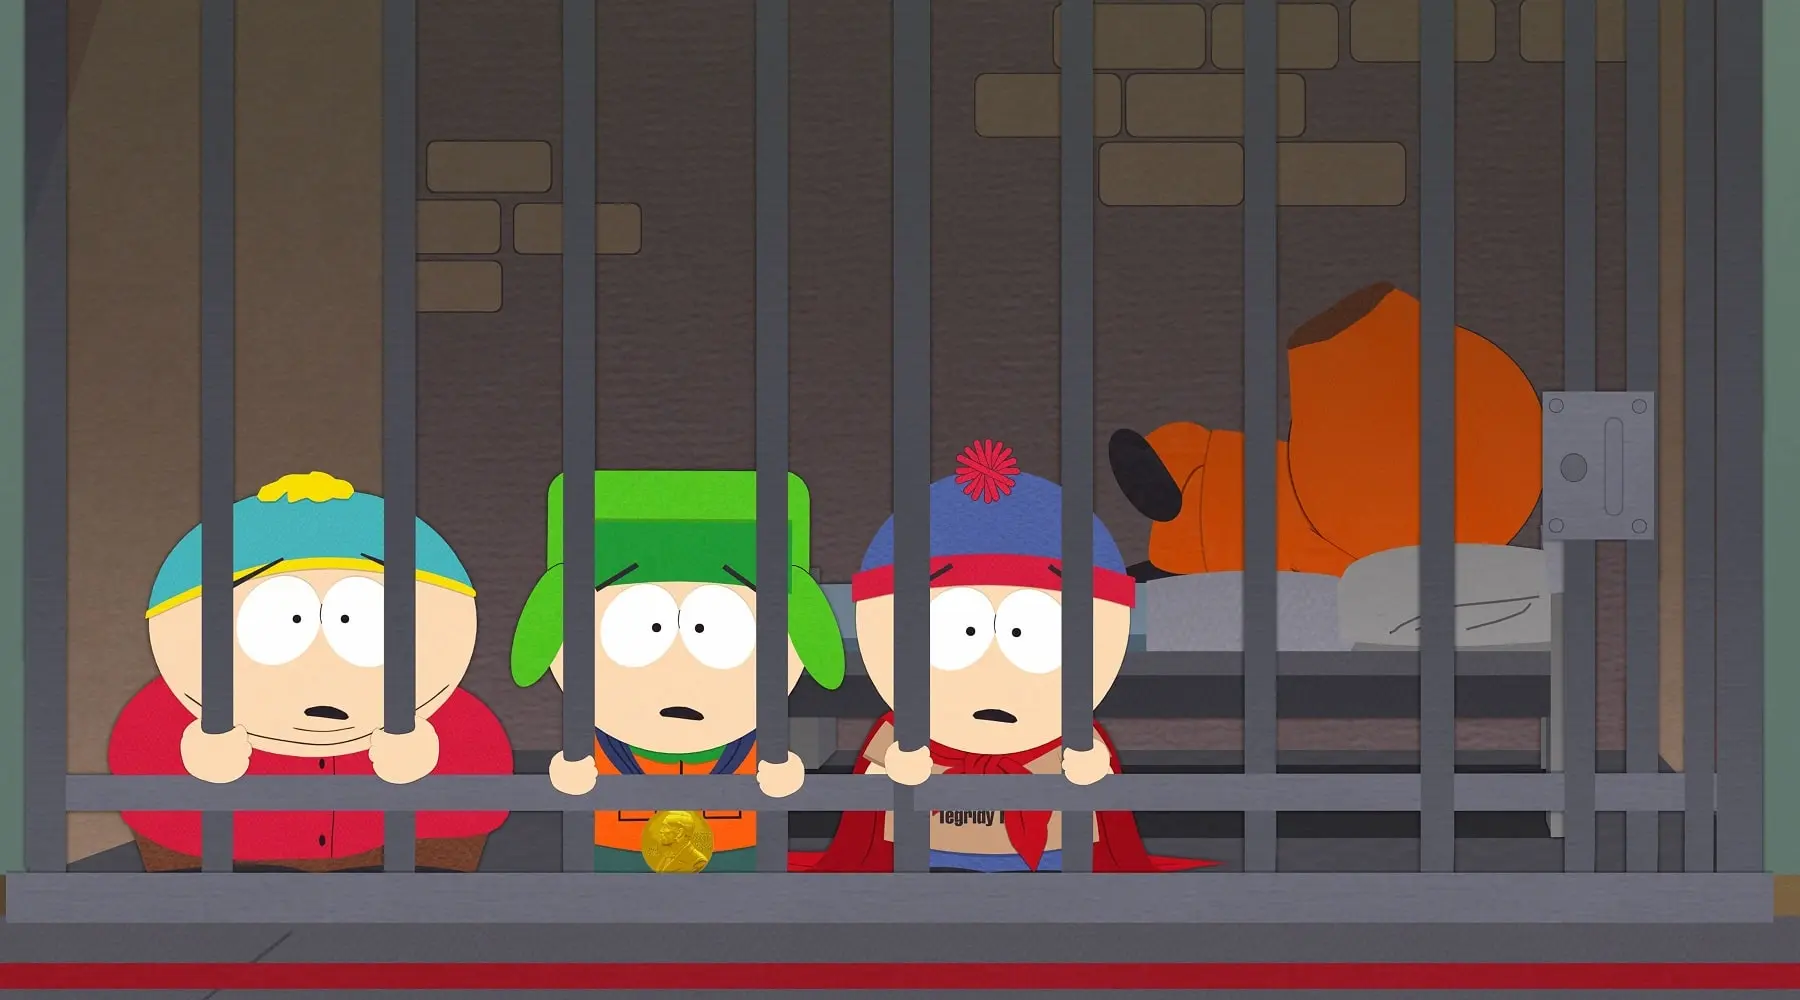 Watch South Park online   TV (Free Trial)